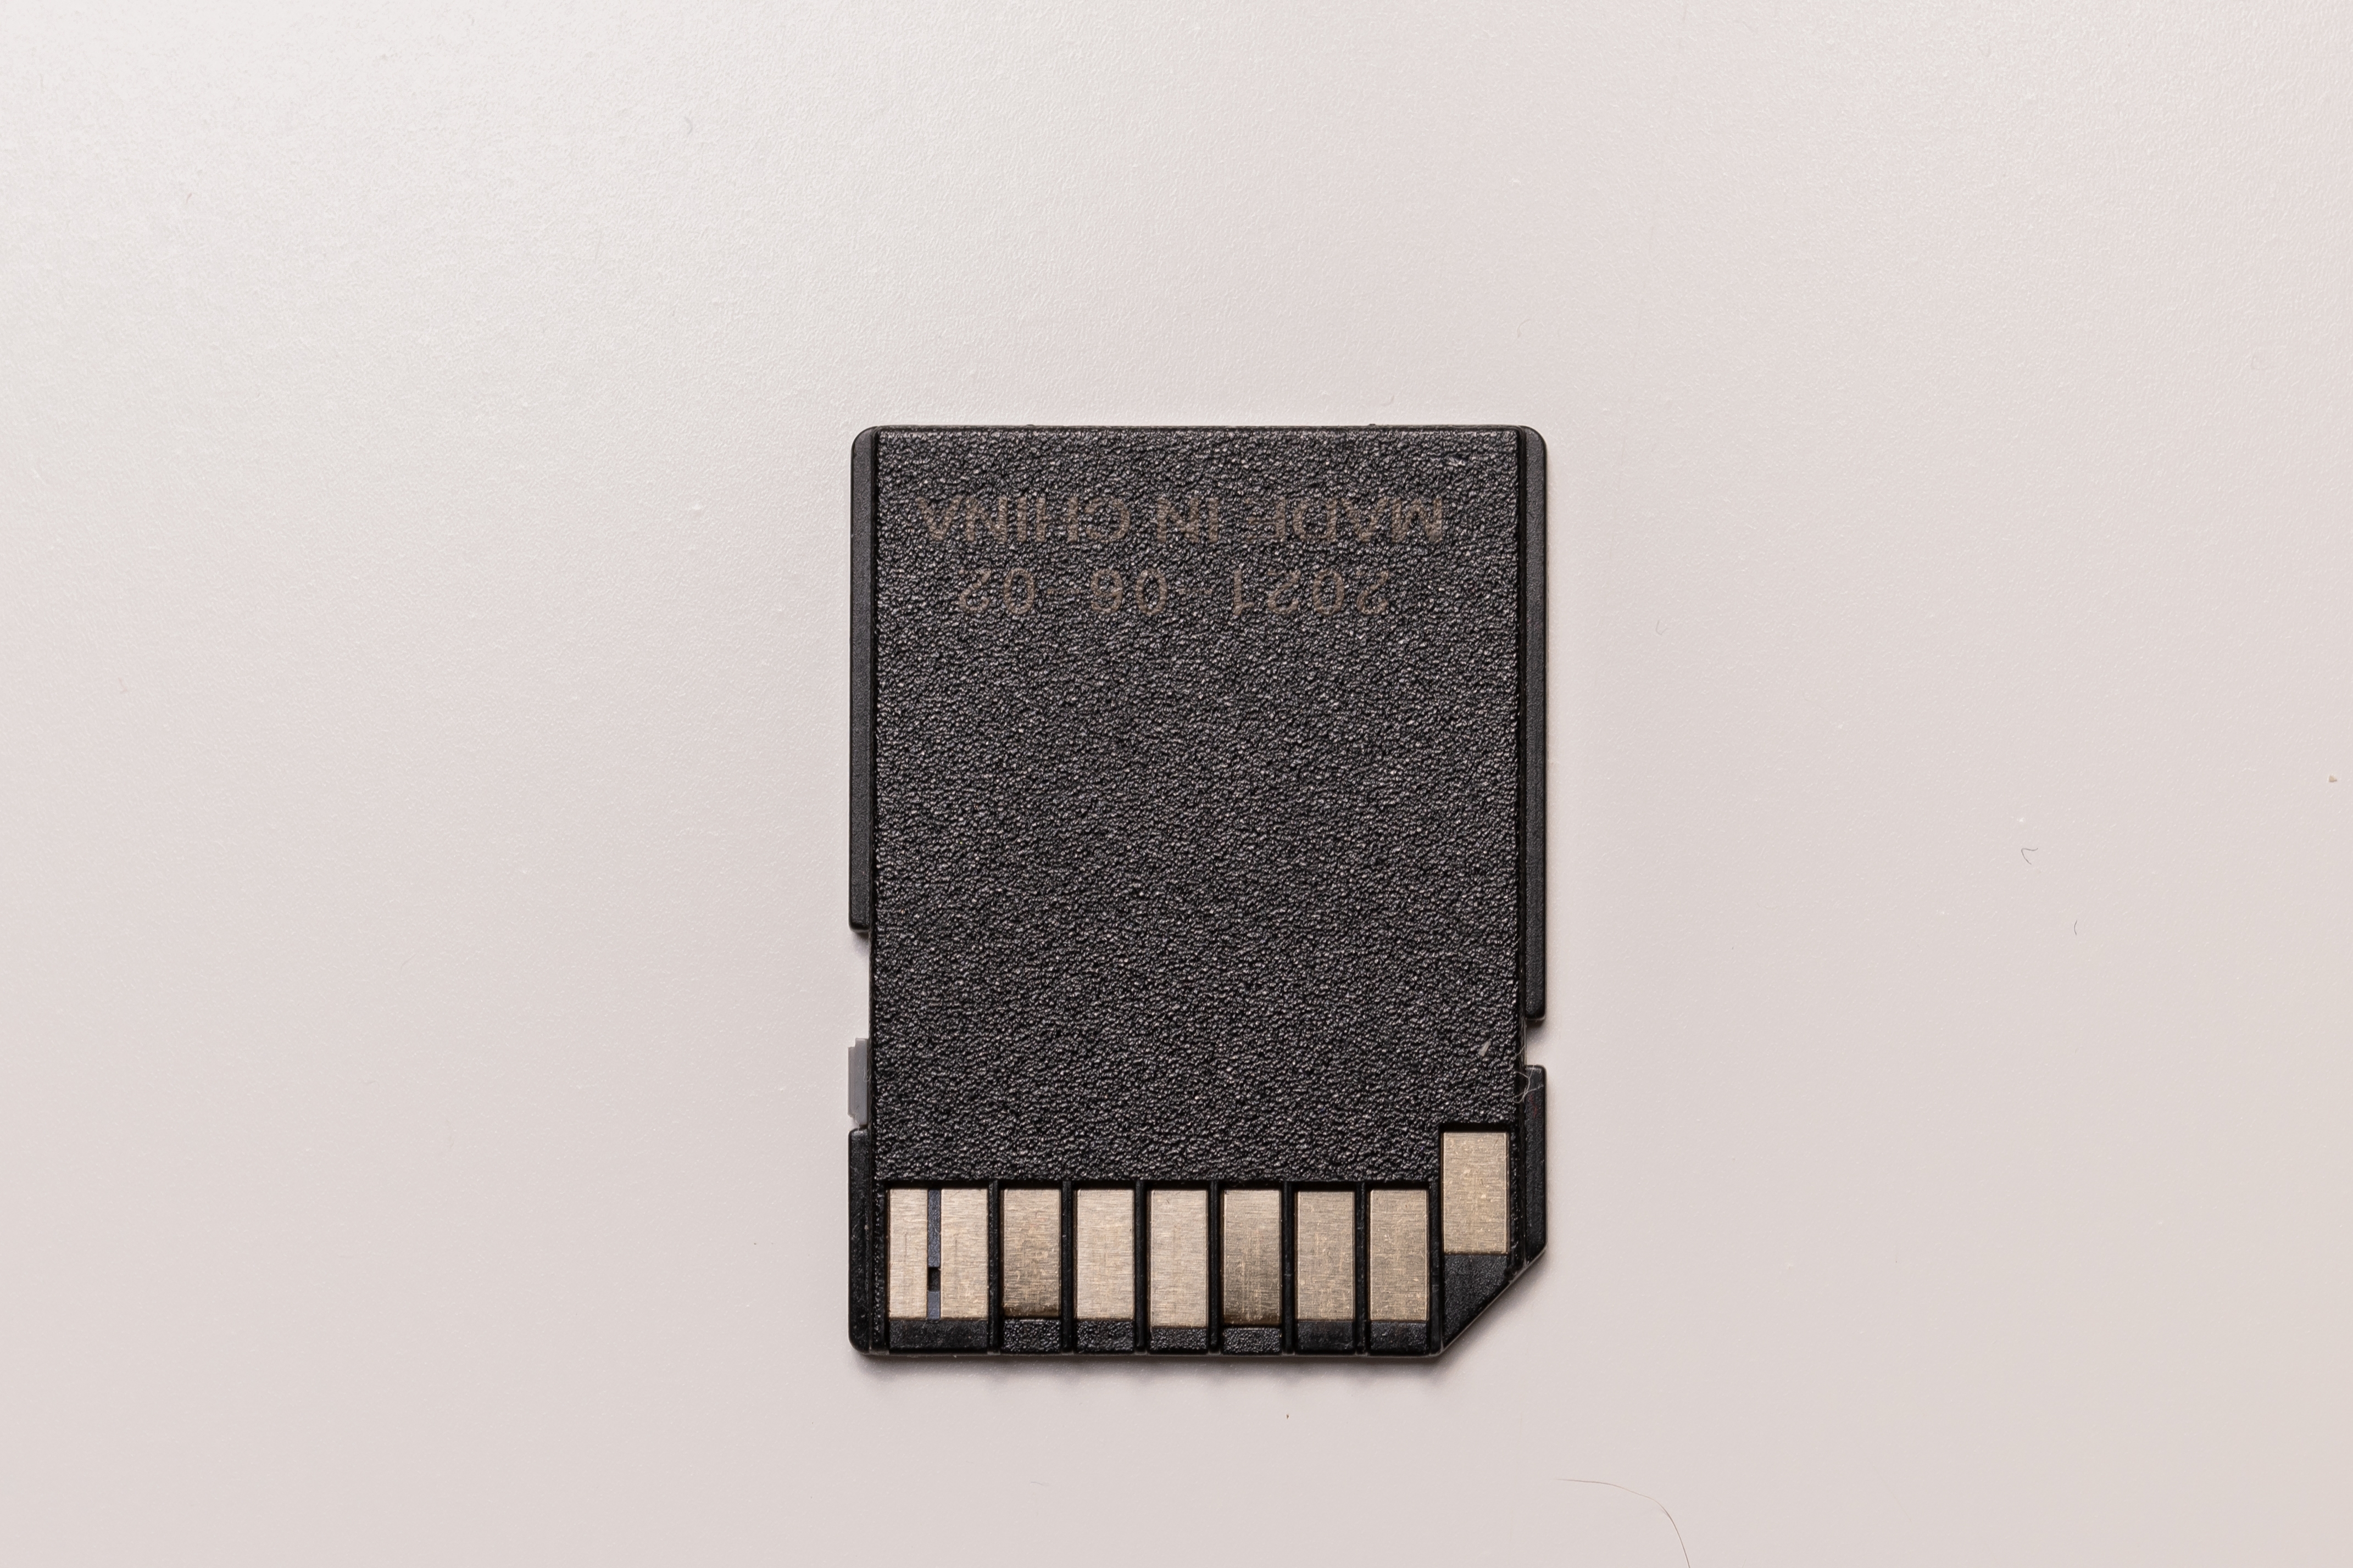 a picture of memory card. | Source: Shutterstock